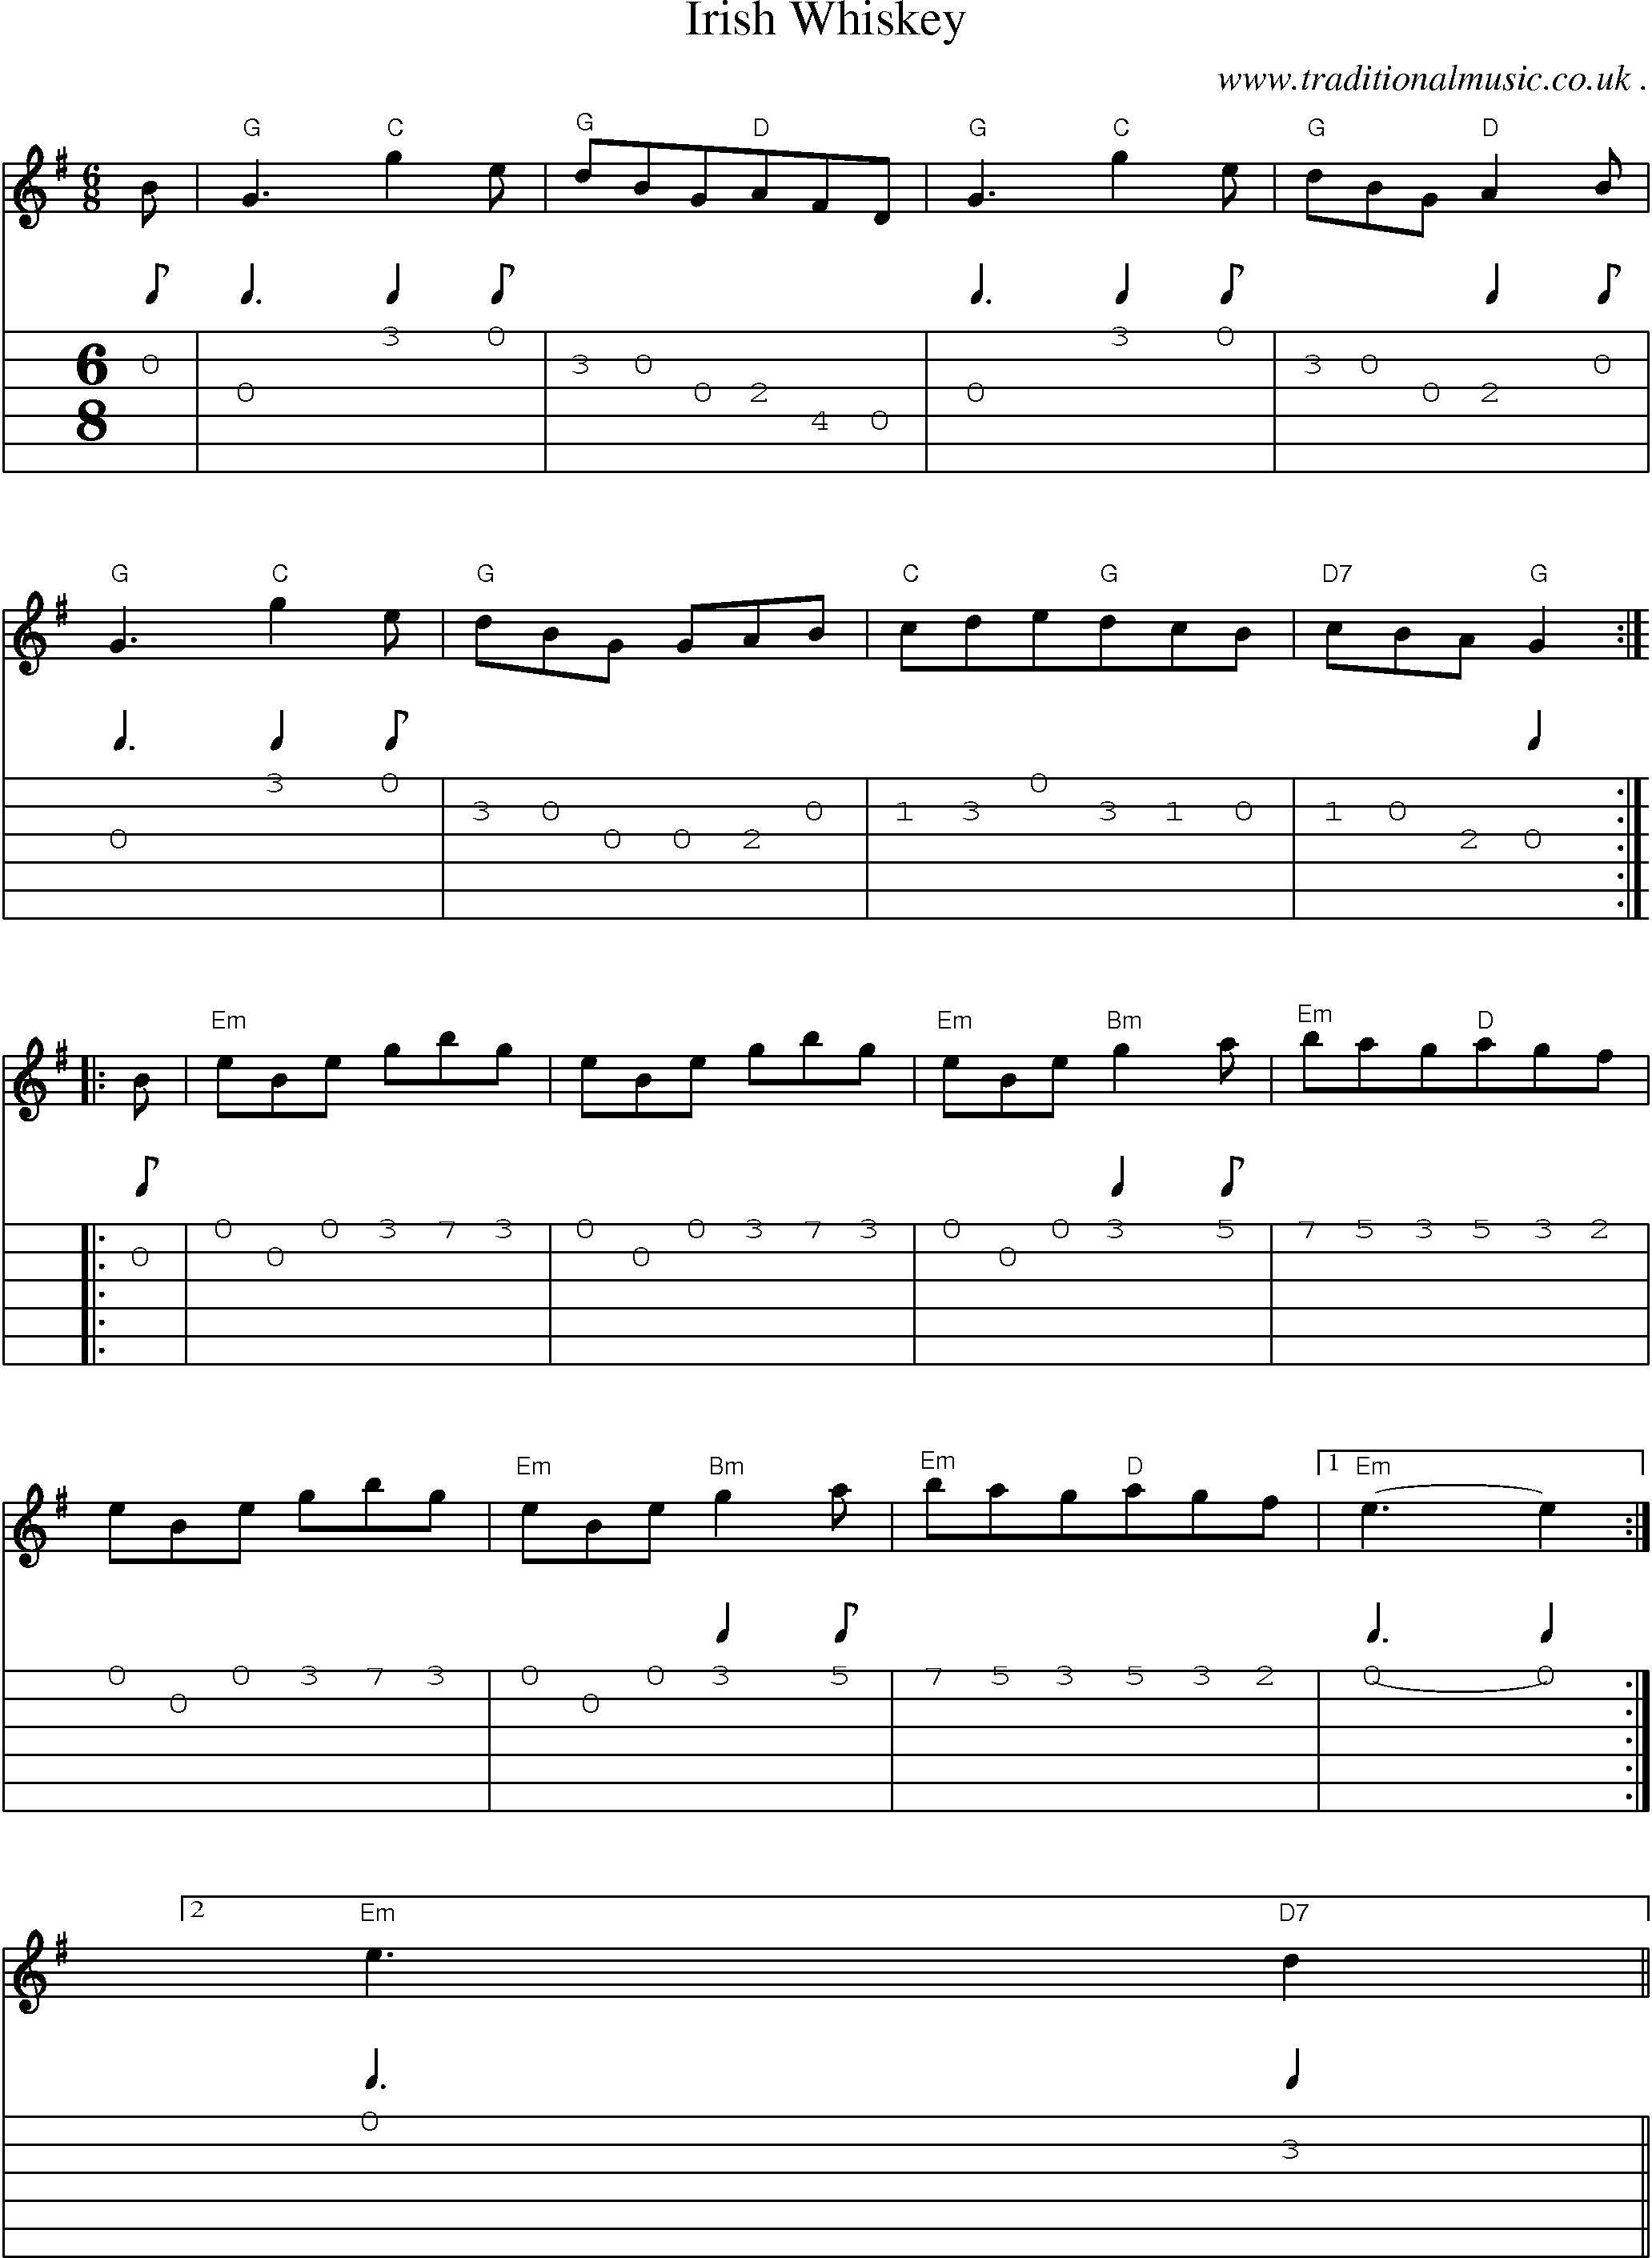 Sheet-Music and Guitar Tabs for Irish Whiskey